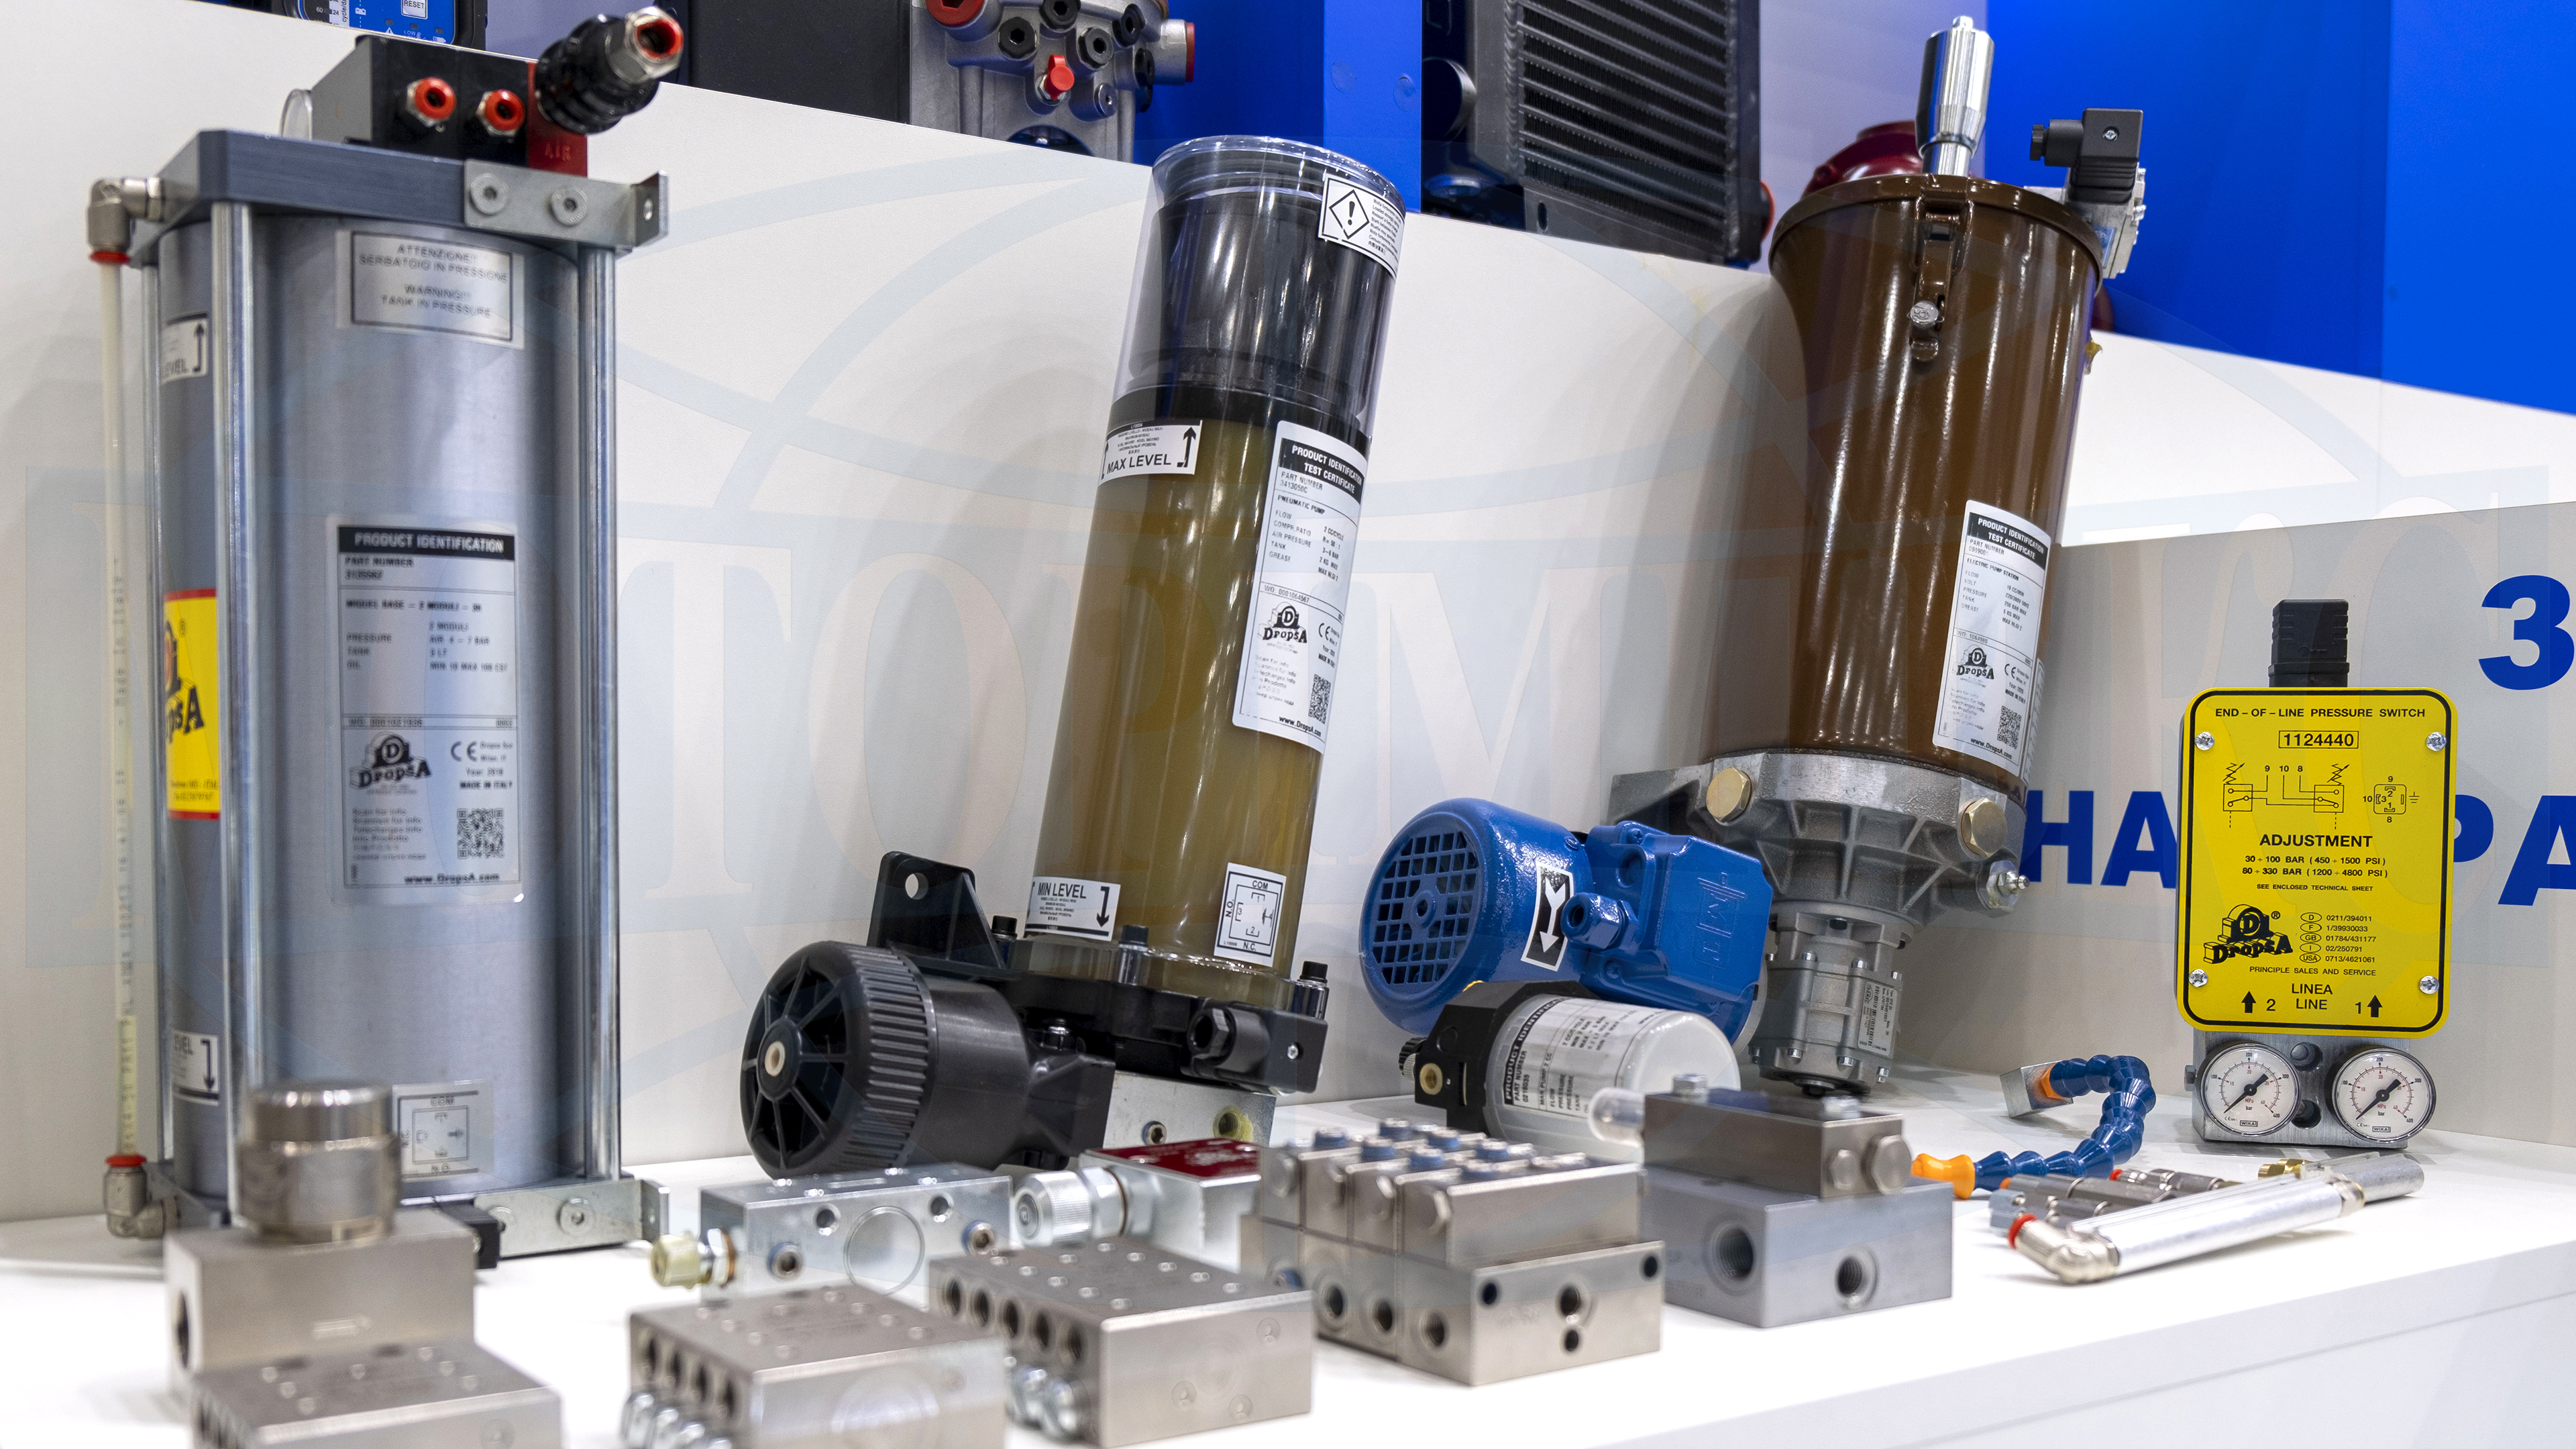 Lubrication system components manufactured by 'Dropsa' from 'Motorimpex'